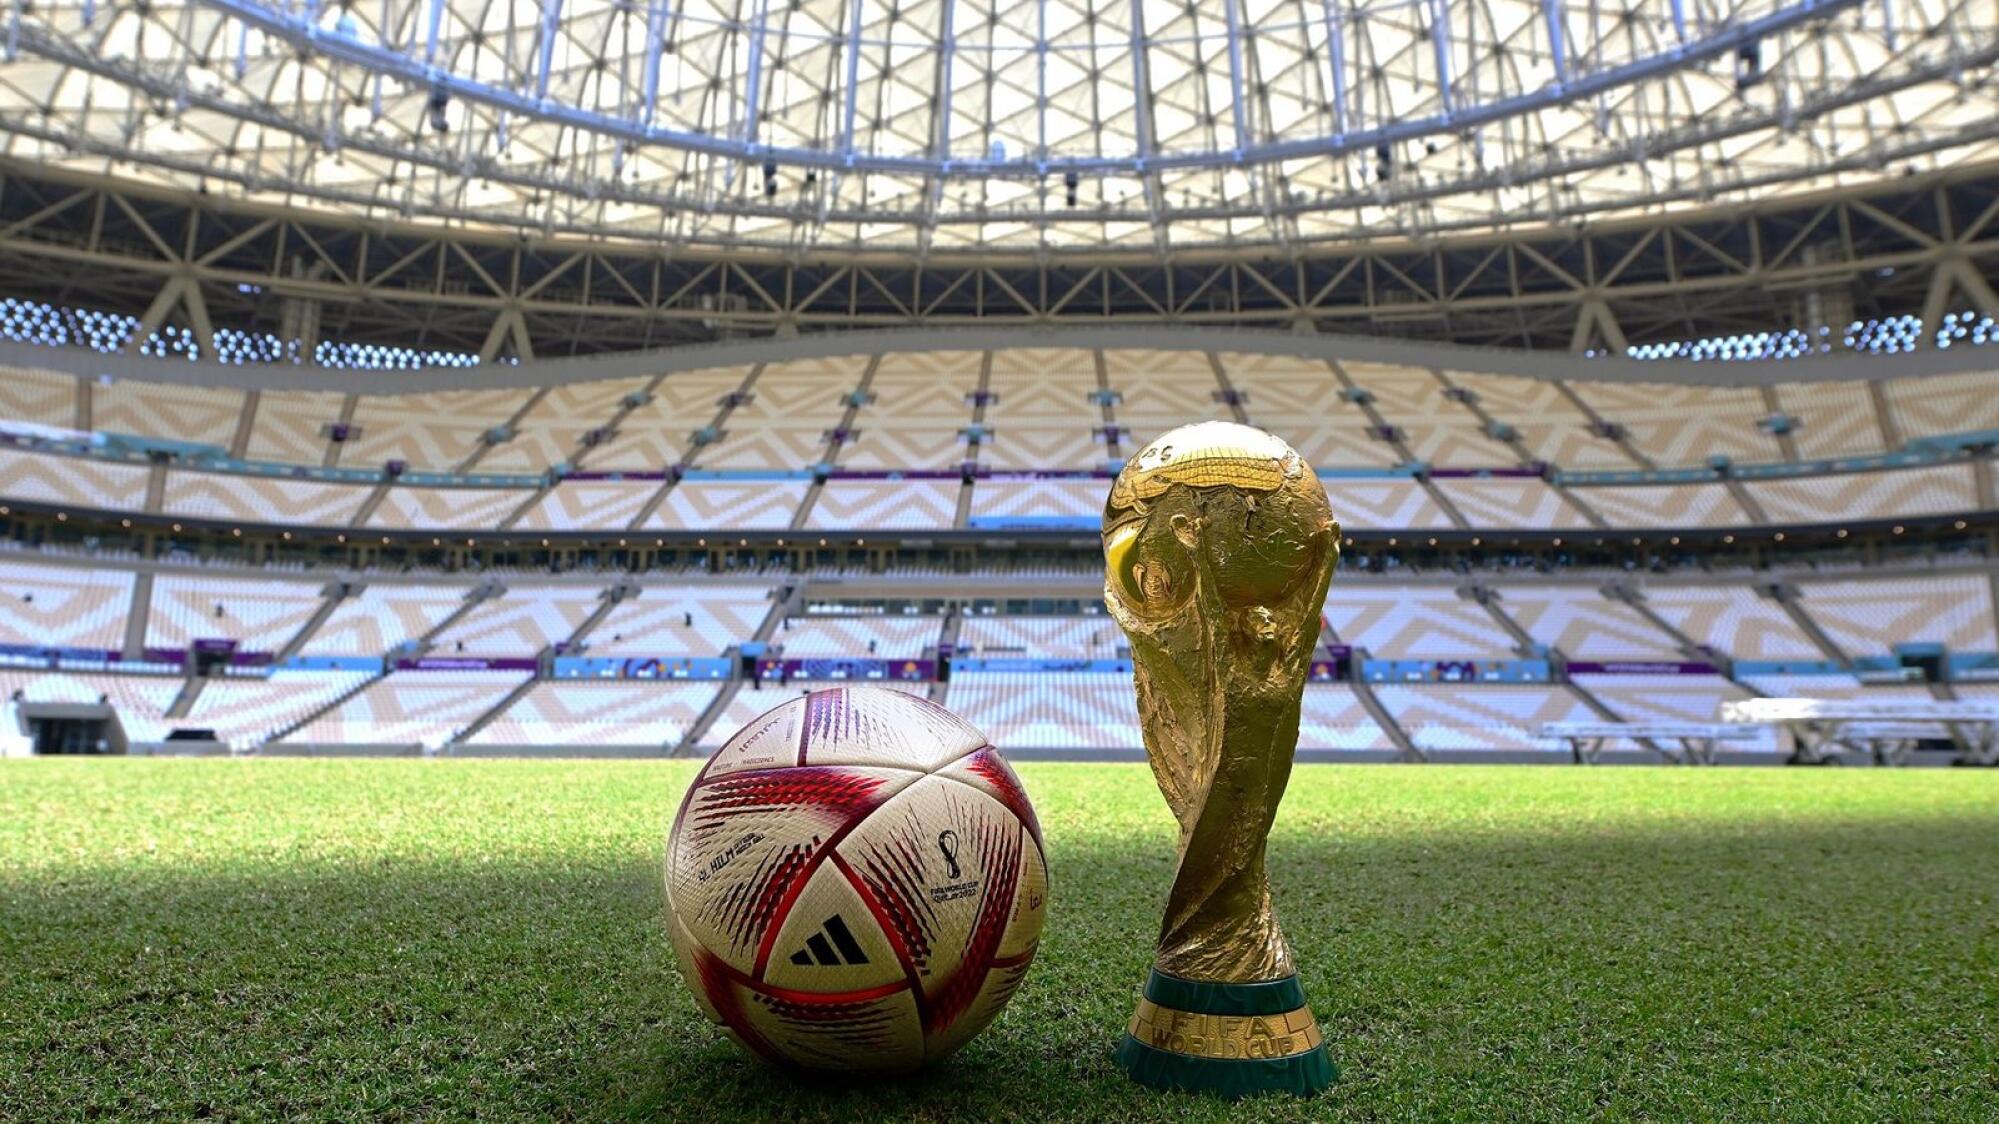 International sports apparel brand adidas have released a new ball for the final stages of the 2022 Fifa World Cup